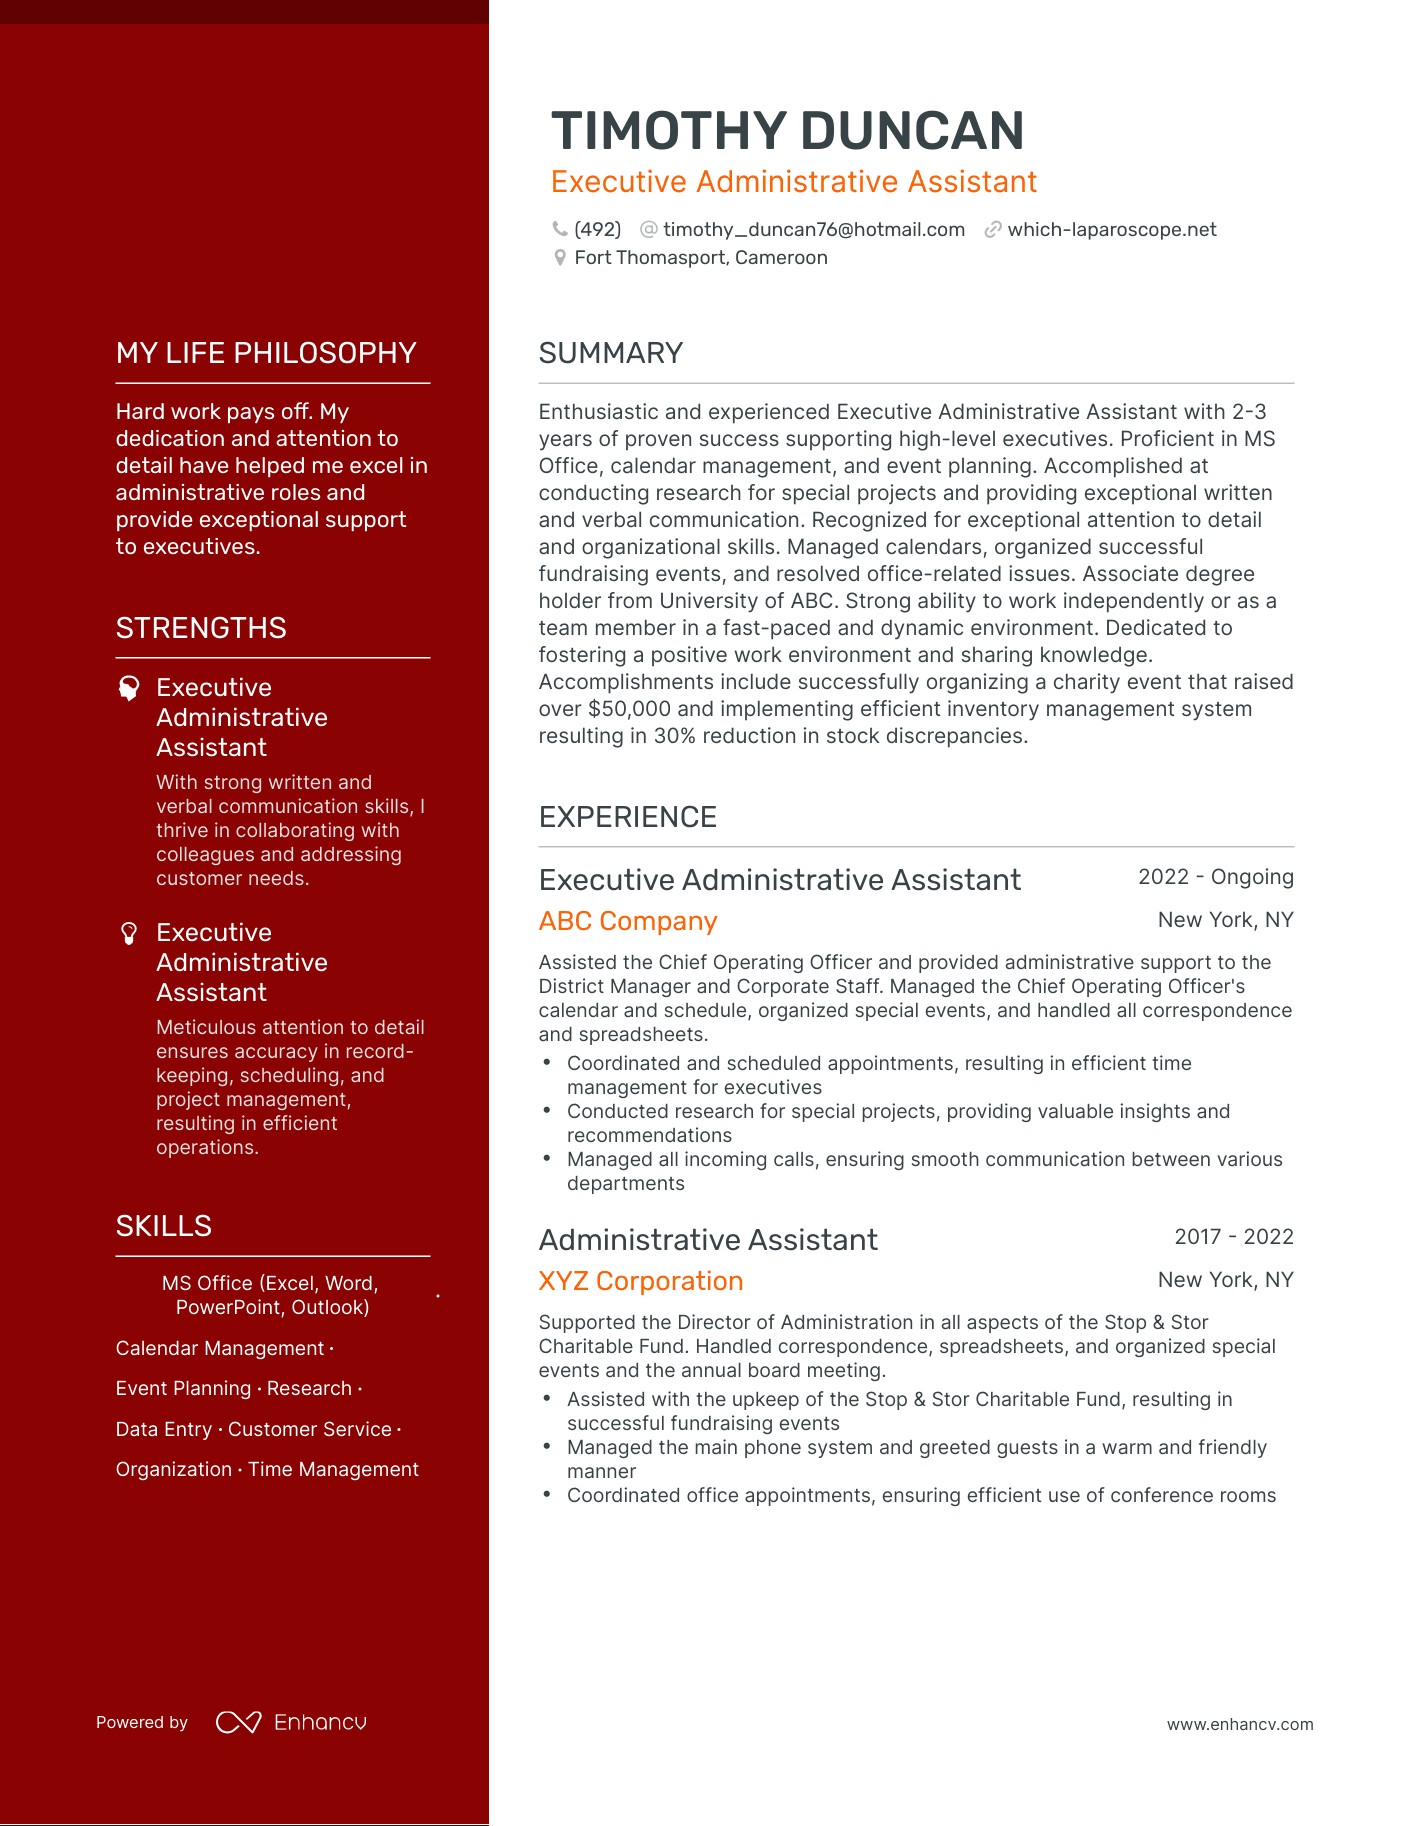 Executive Administrative Assistant resume example